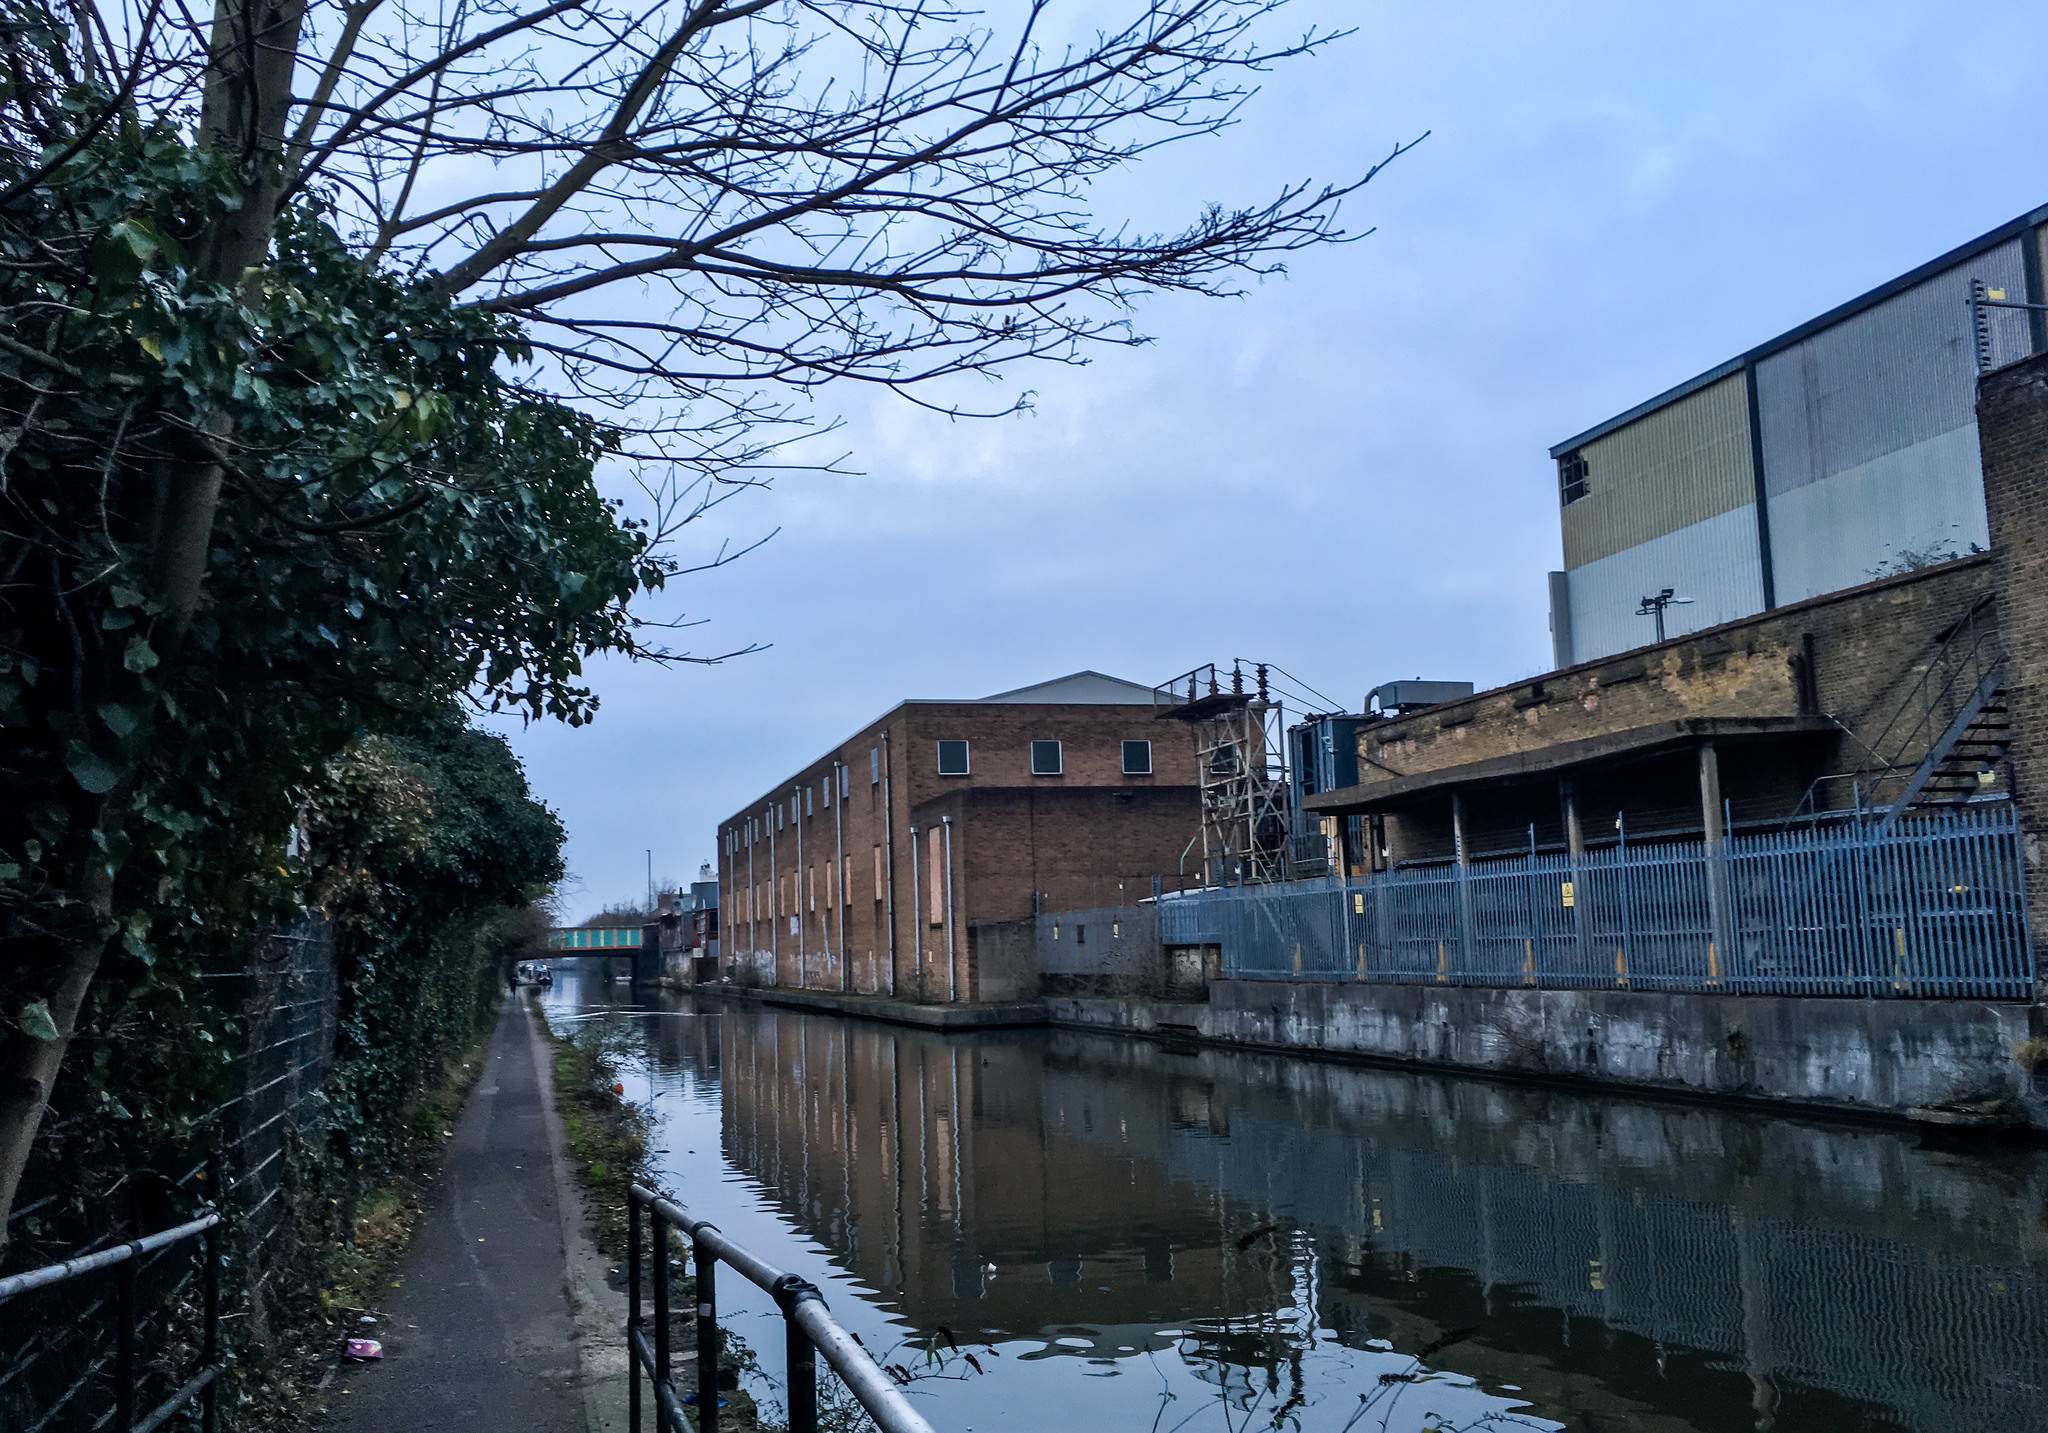 Running path along Grand Union Canale, London